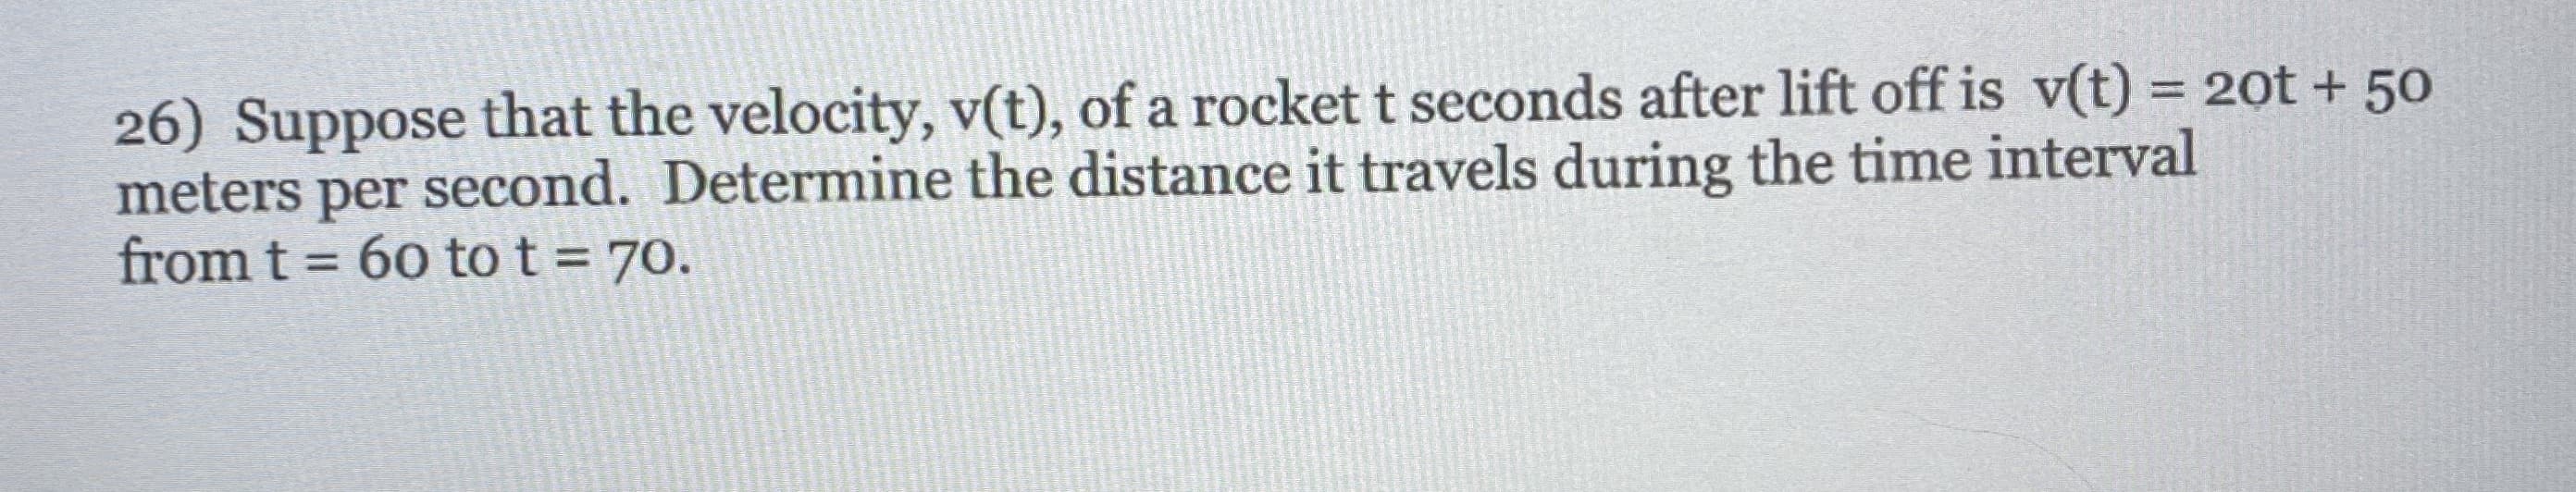 26) Suppose that the velocity, v(t), of a rocket t seconds after lift off is v(t) = 20t + 50
meters per second. Determine the distance it travels during the time interval
from t =
%3D
60 to t = 70.
%3D
